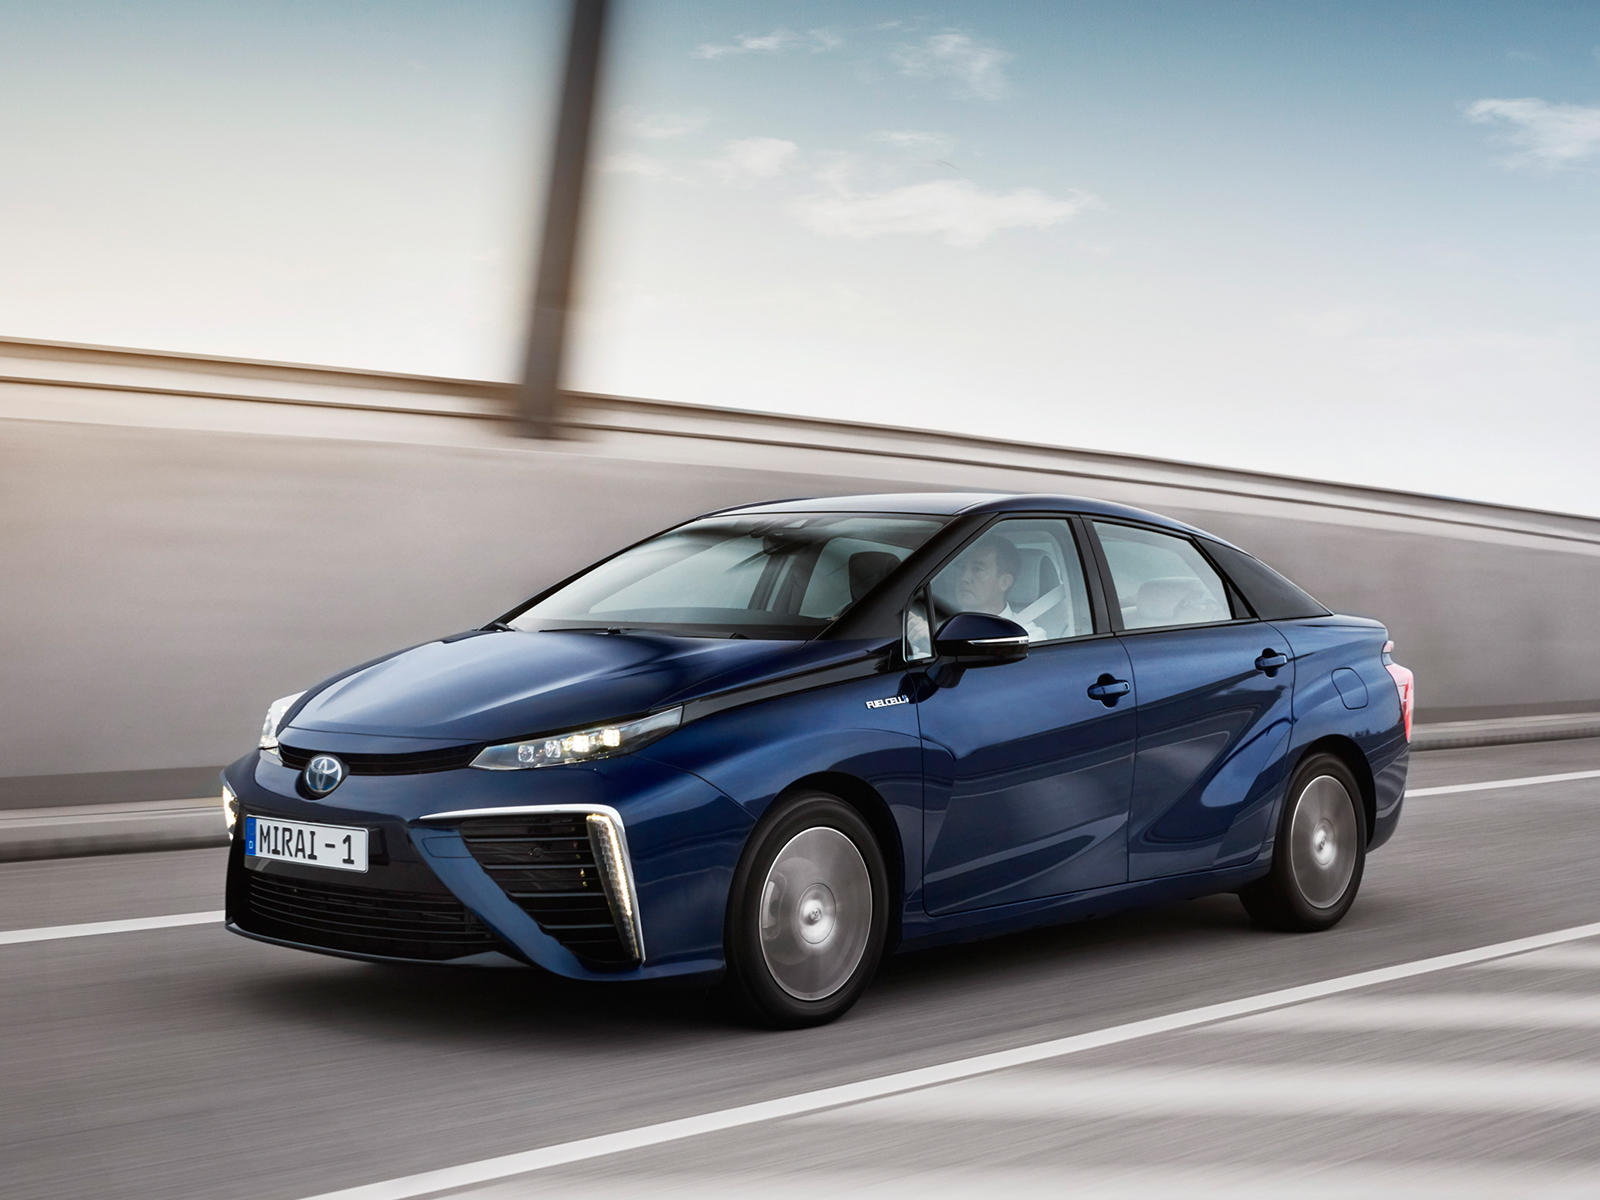 Investment in hydrogen fuel falls 20% in 2020; fuel cell vehicle demand to be fragile